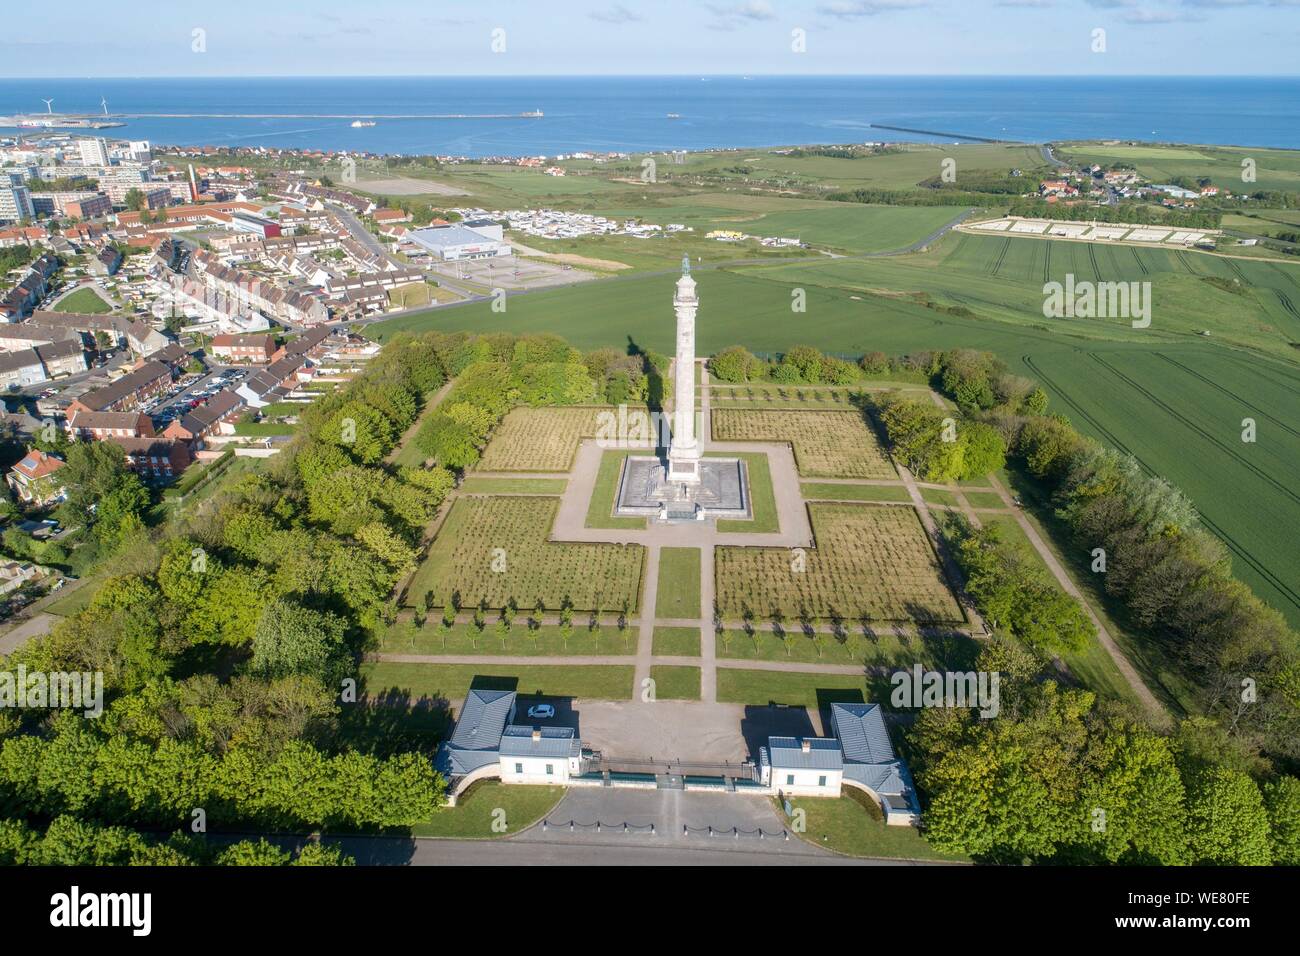 France, Pas de Calais, Wimille, Column of the Grand Army, erected in 1804 on the orders of Napoleon I, listed as historical monument (aerial view) Stock Photo